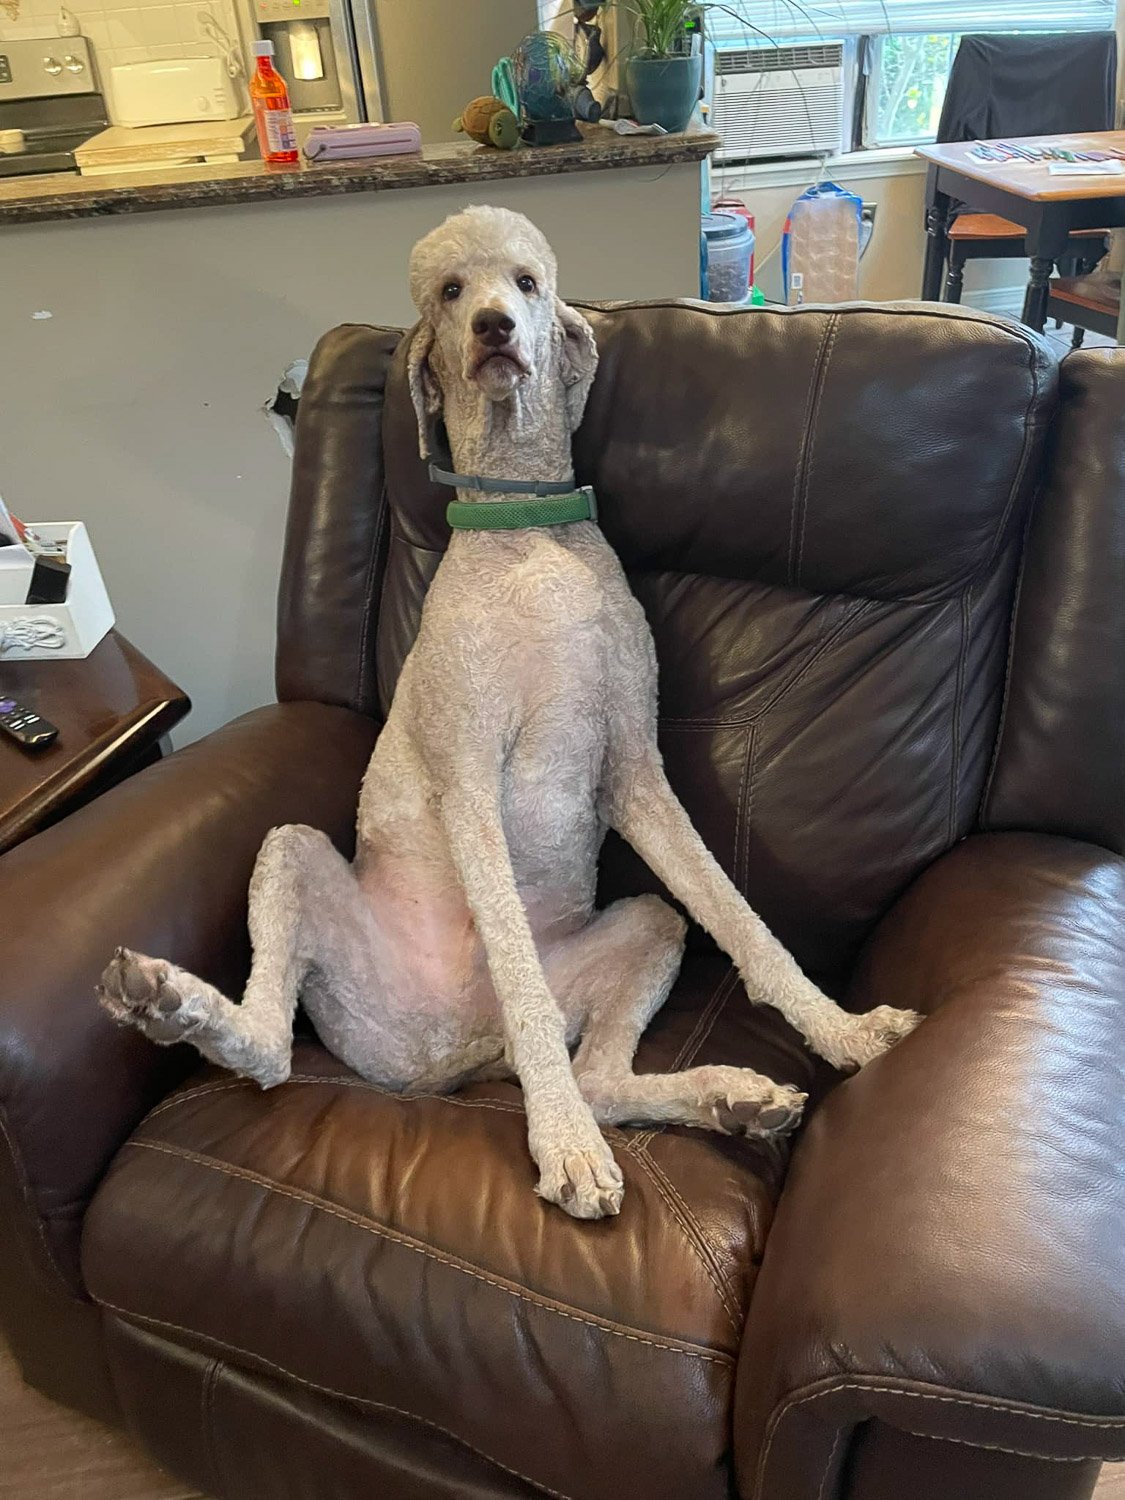 A large cream colored Poodle dog sitting upright on a leather couch